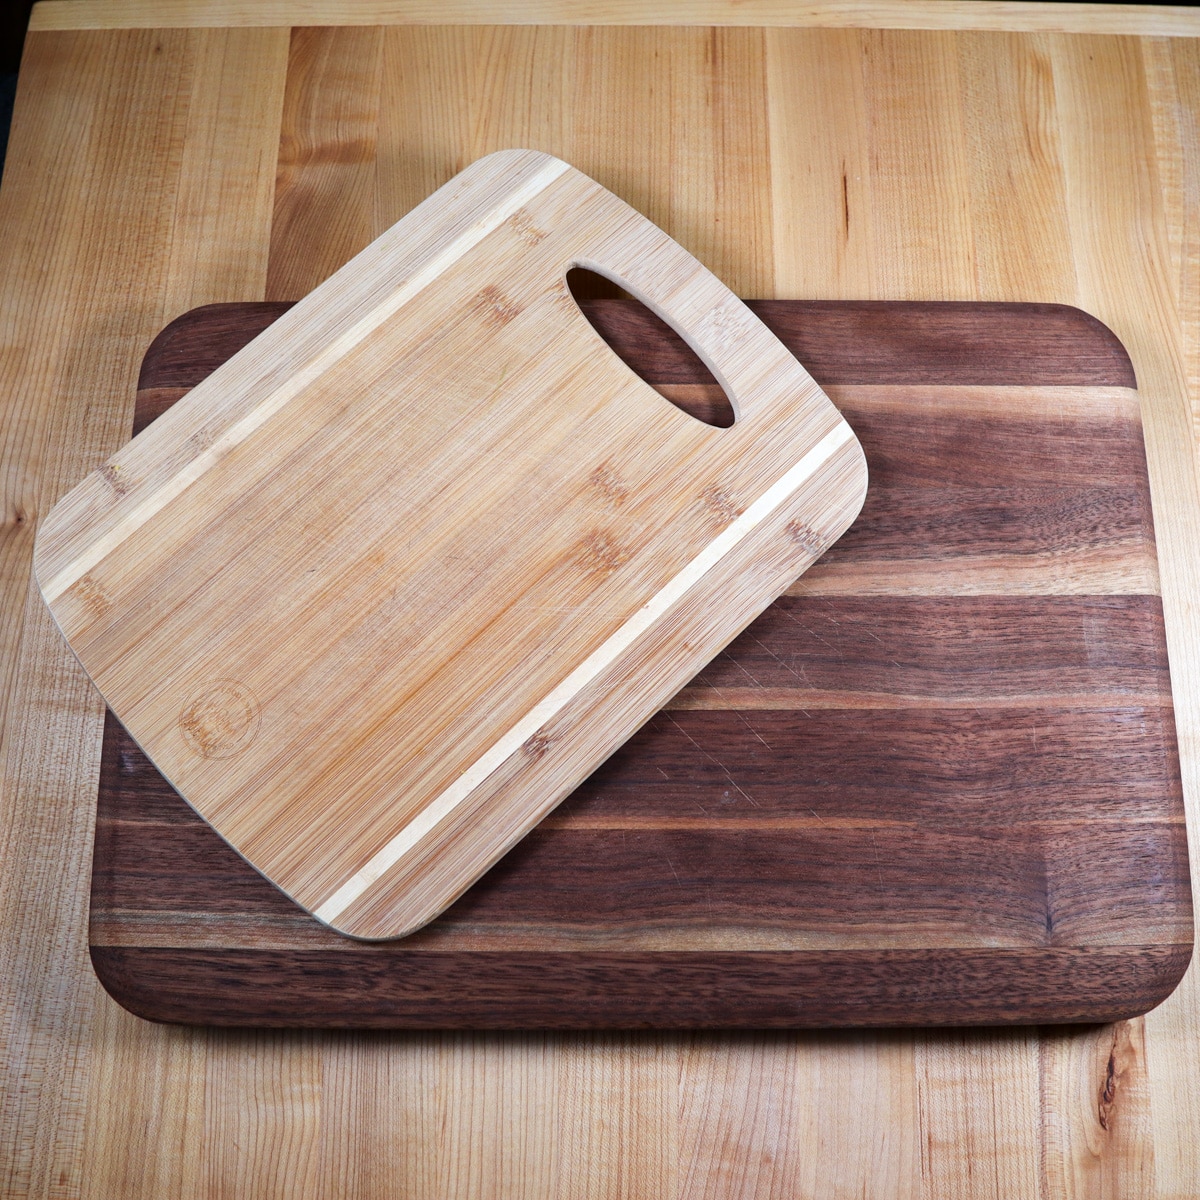 Three different sized cutting boards stacked on top of one another.